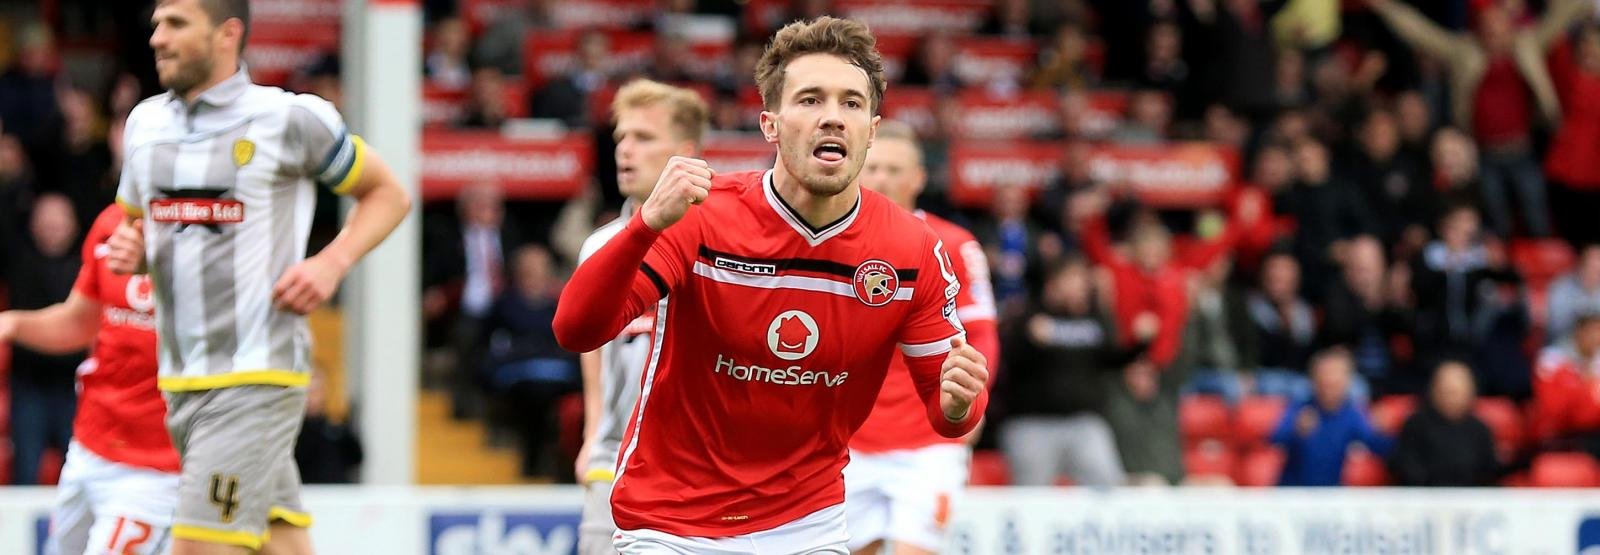 League One Round-Up: Walsall see off Peterborough to stay top on goal difference